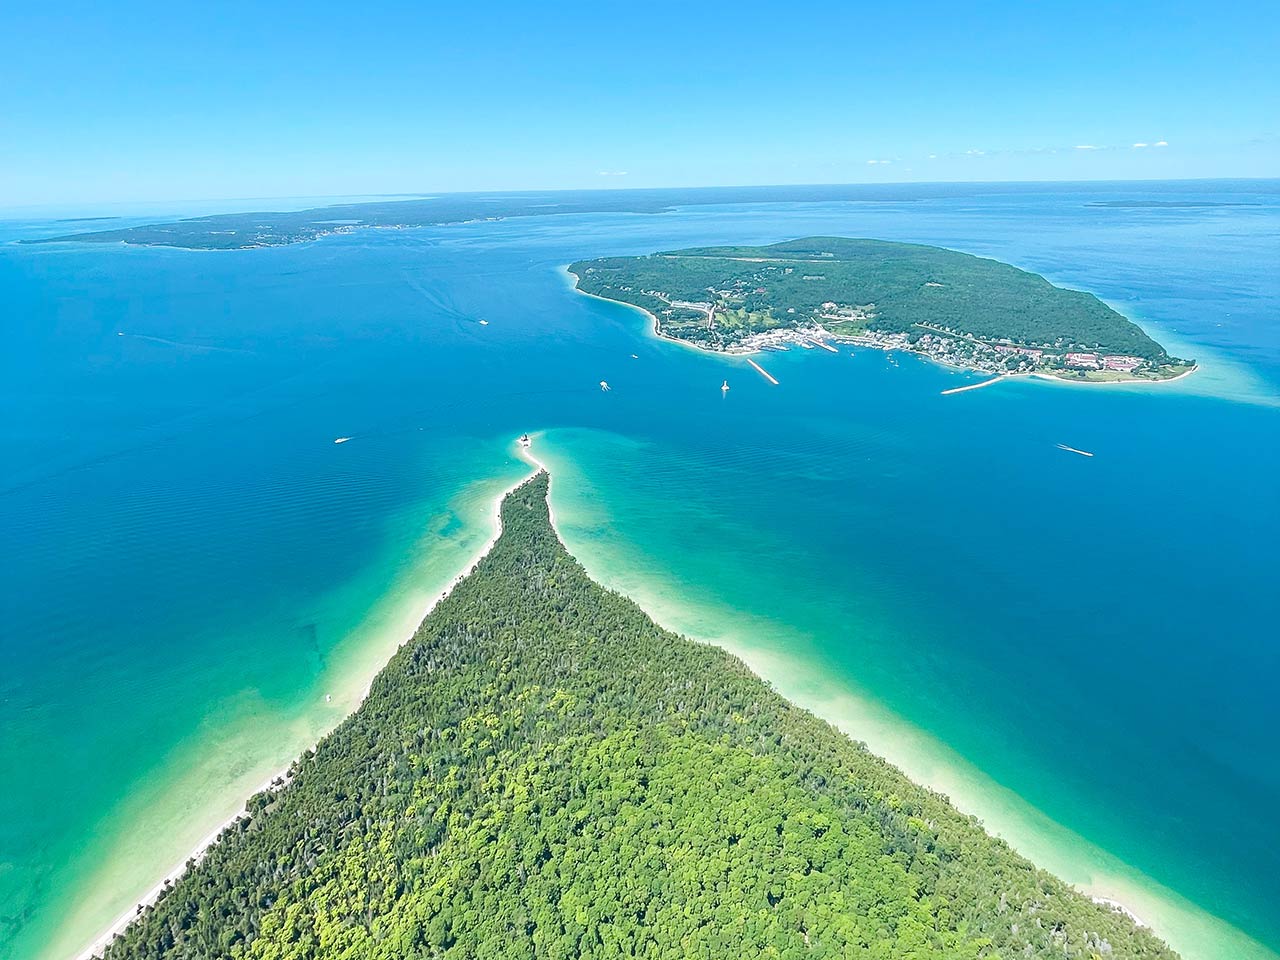 Helicopter view of Mackinac Island and St. Ignace